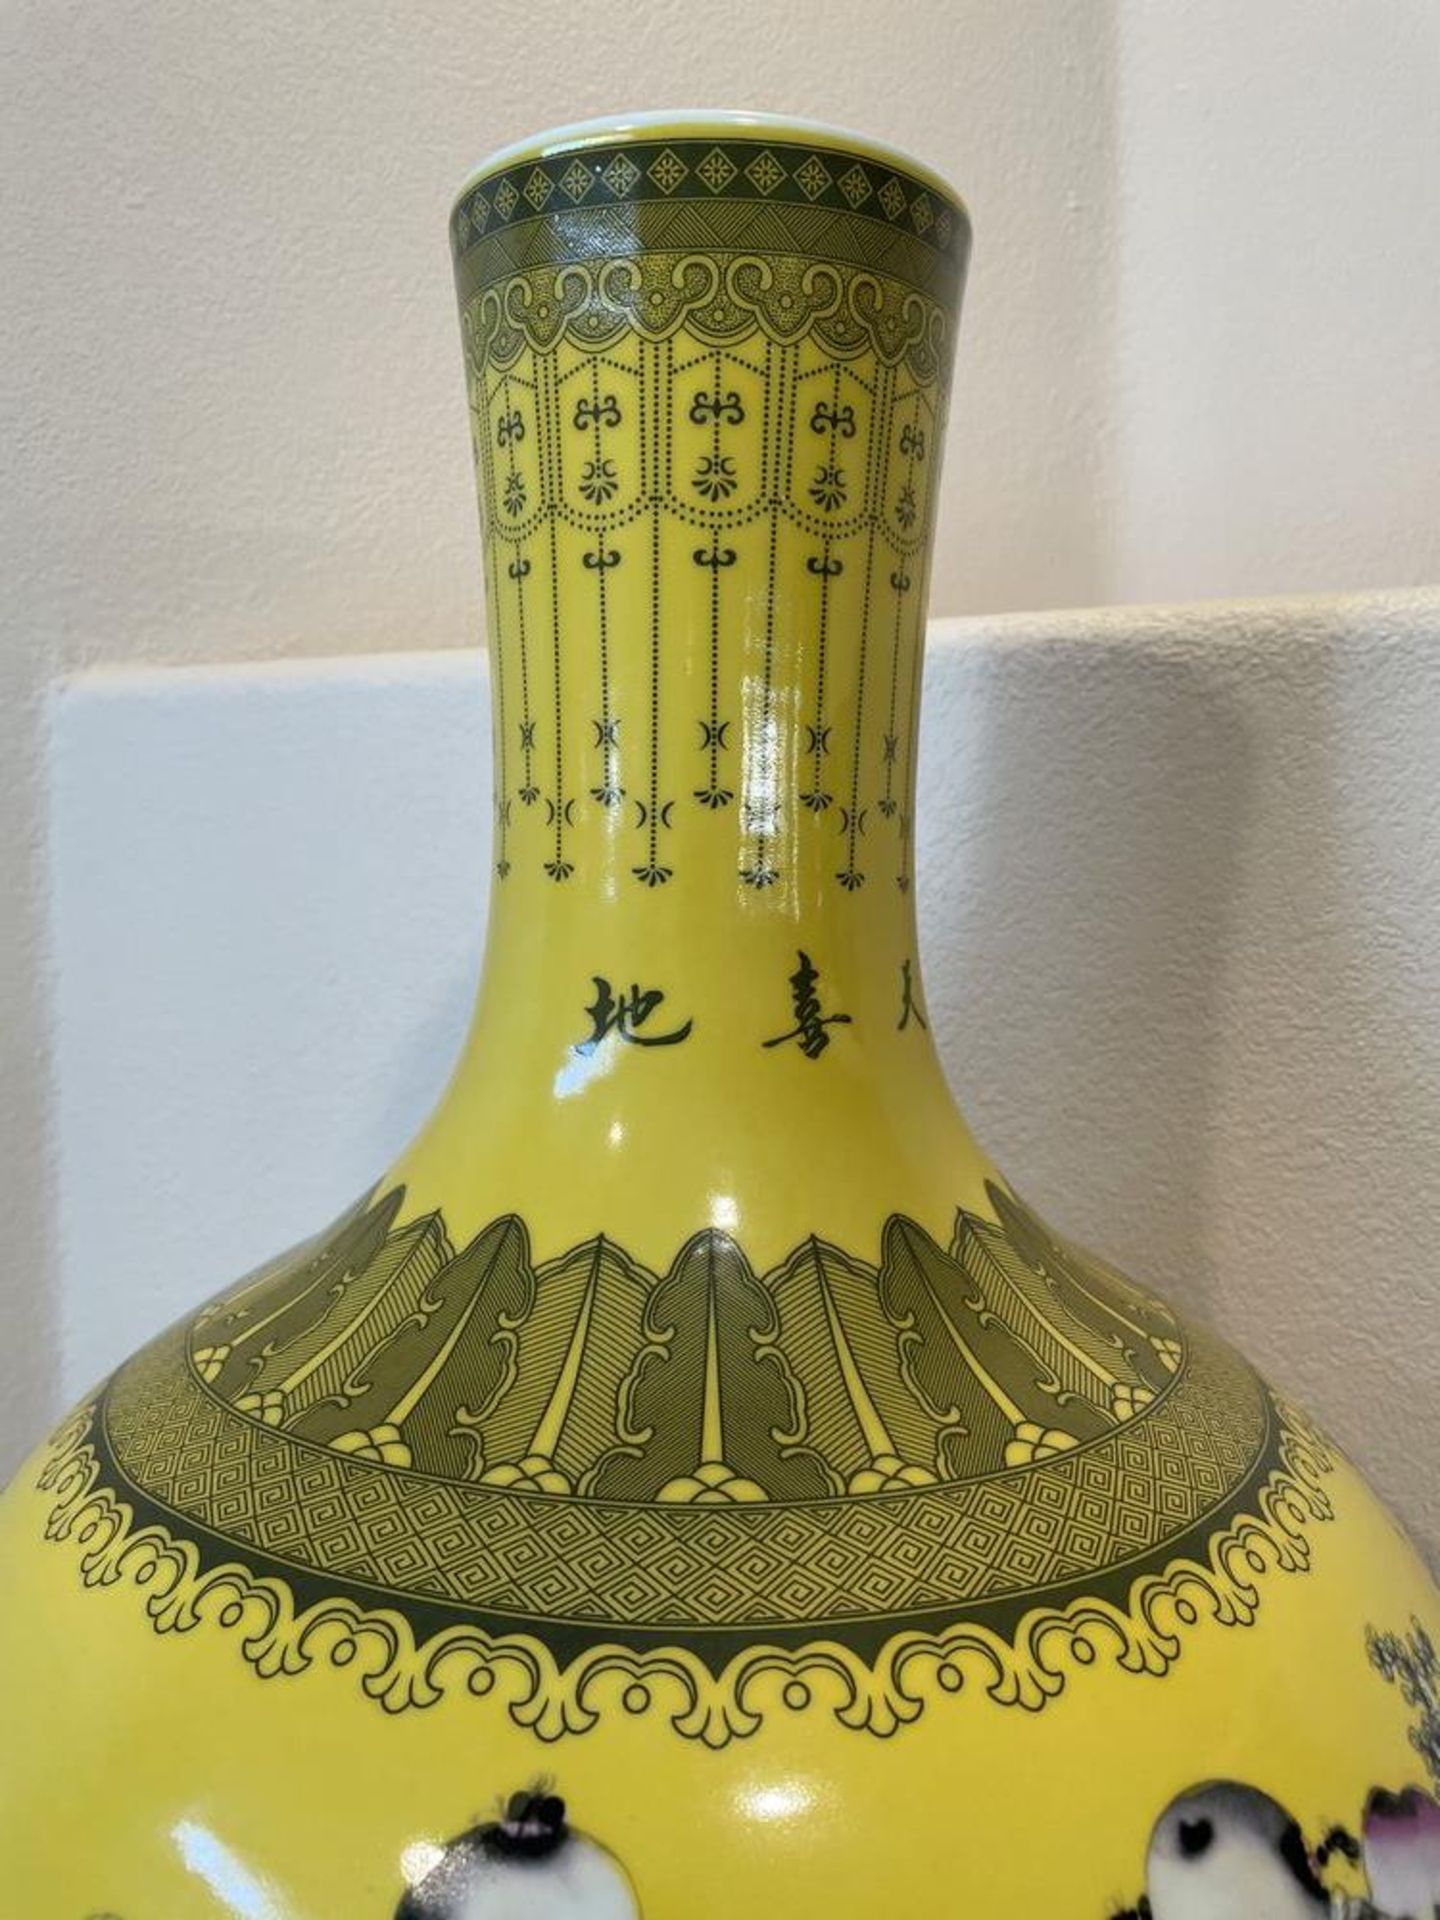 Large Antique East Asian Yellow Urn Vase Porcelin with wood stand - 27" tall x 15" wide - Image 5 of 7